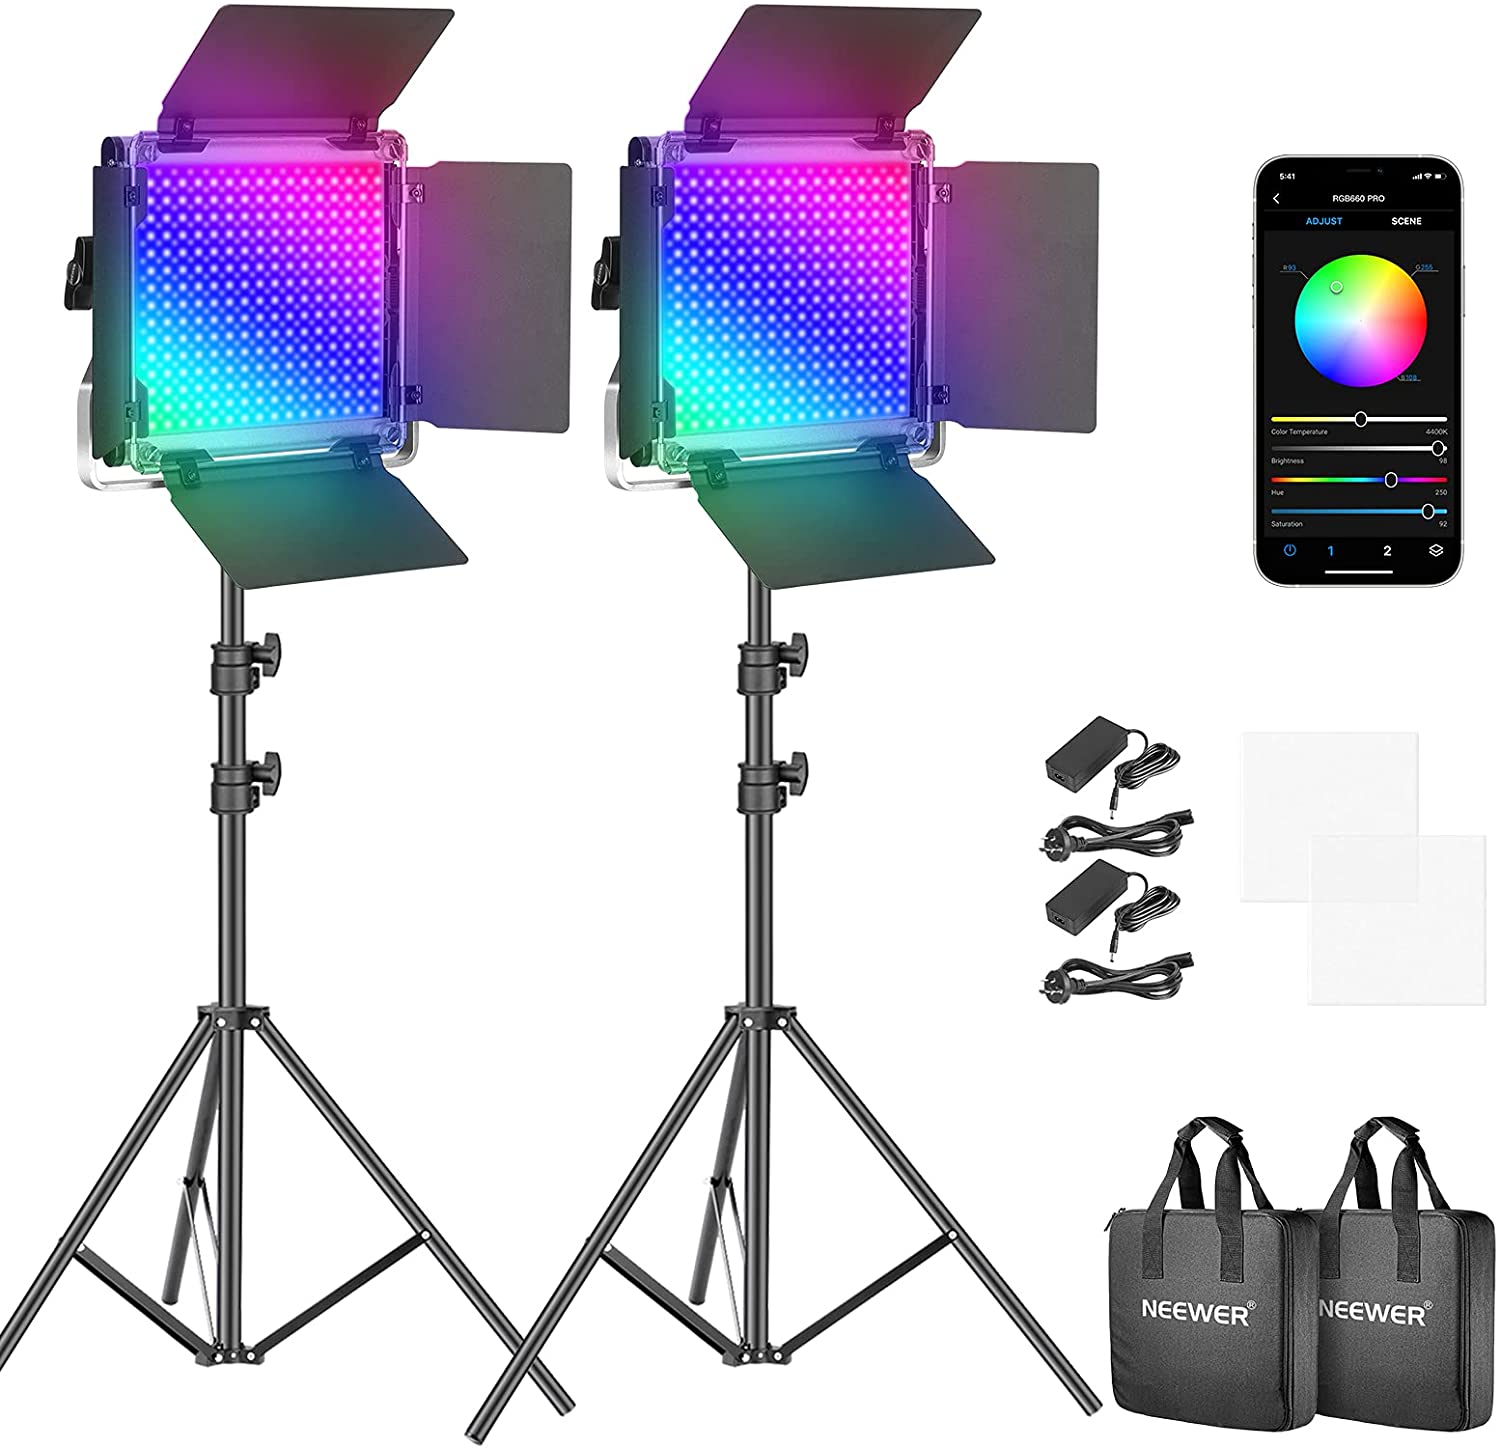 Neewer RGB Led Video Light with APP Control, 360 Full Color, 50W 660 PRO Video Lighting Kit CRI 98+ for Gaming, Streaming, Zoom,YouTube, Webex, Broadcasting, Web Conference, Photography